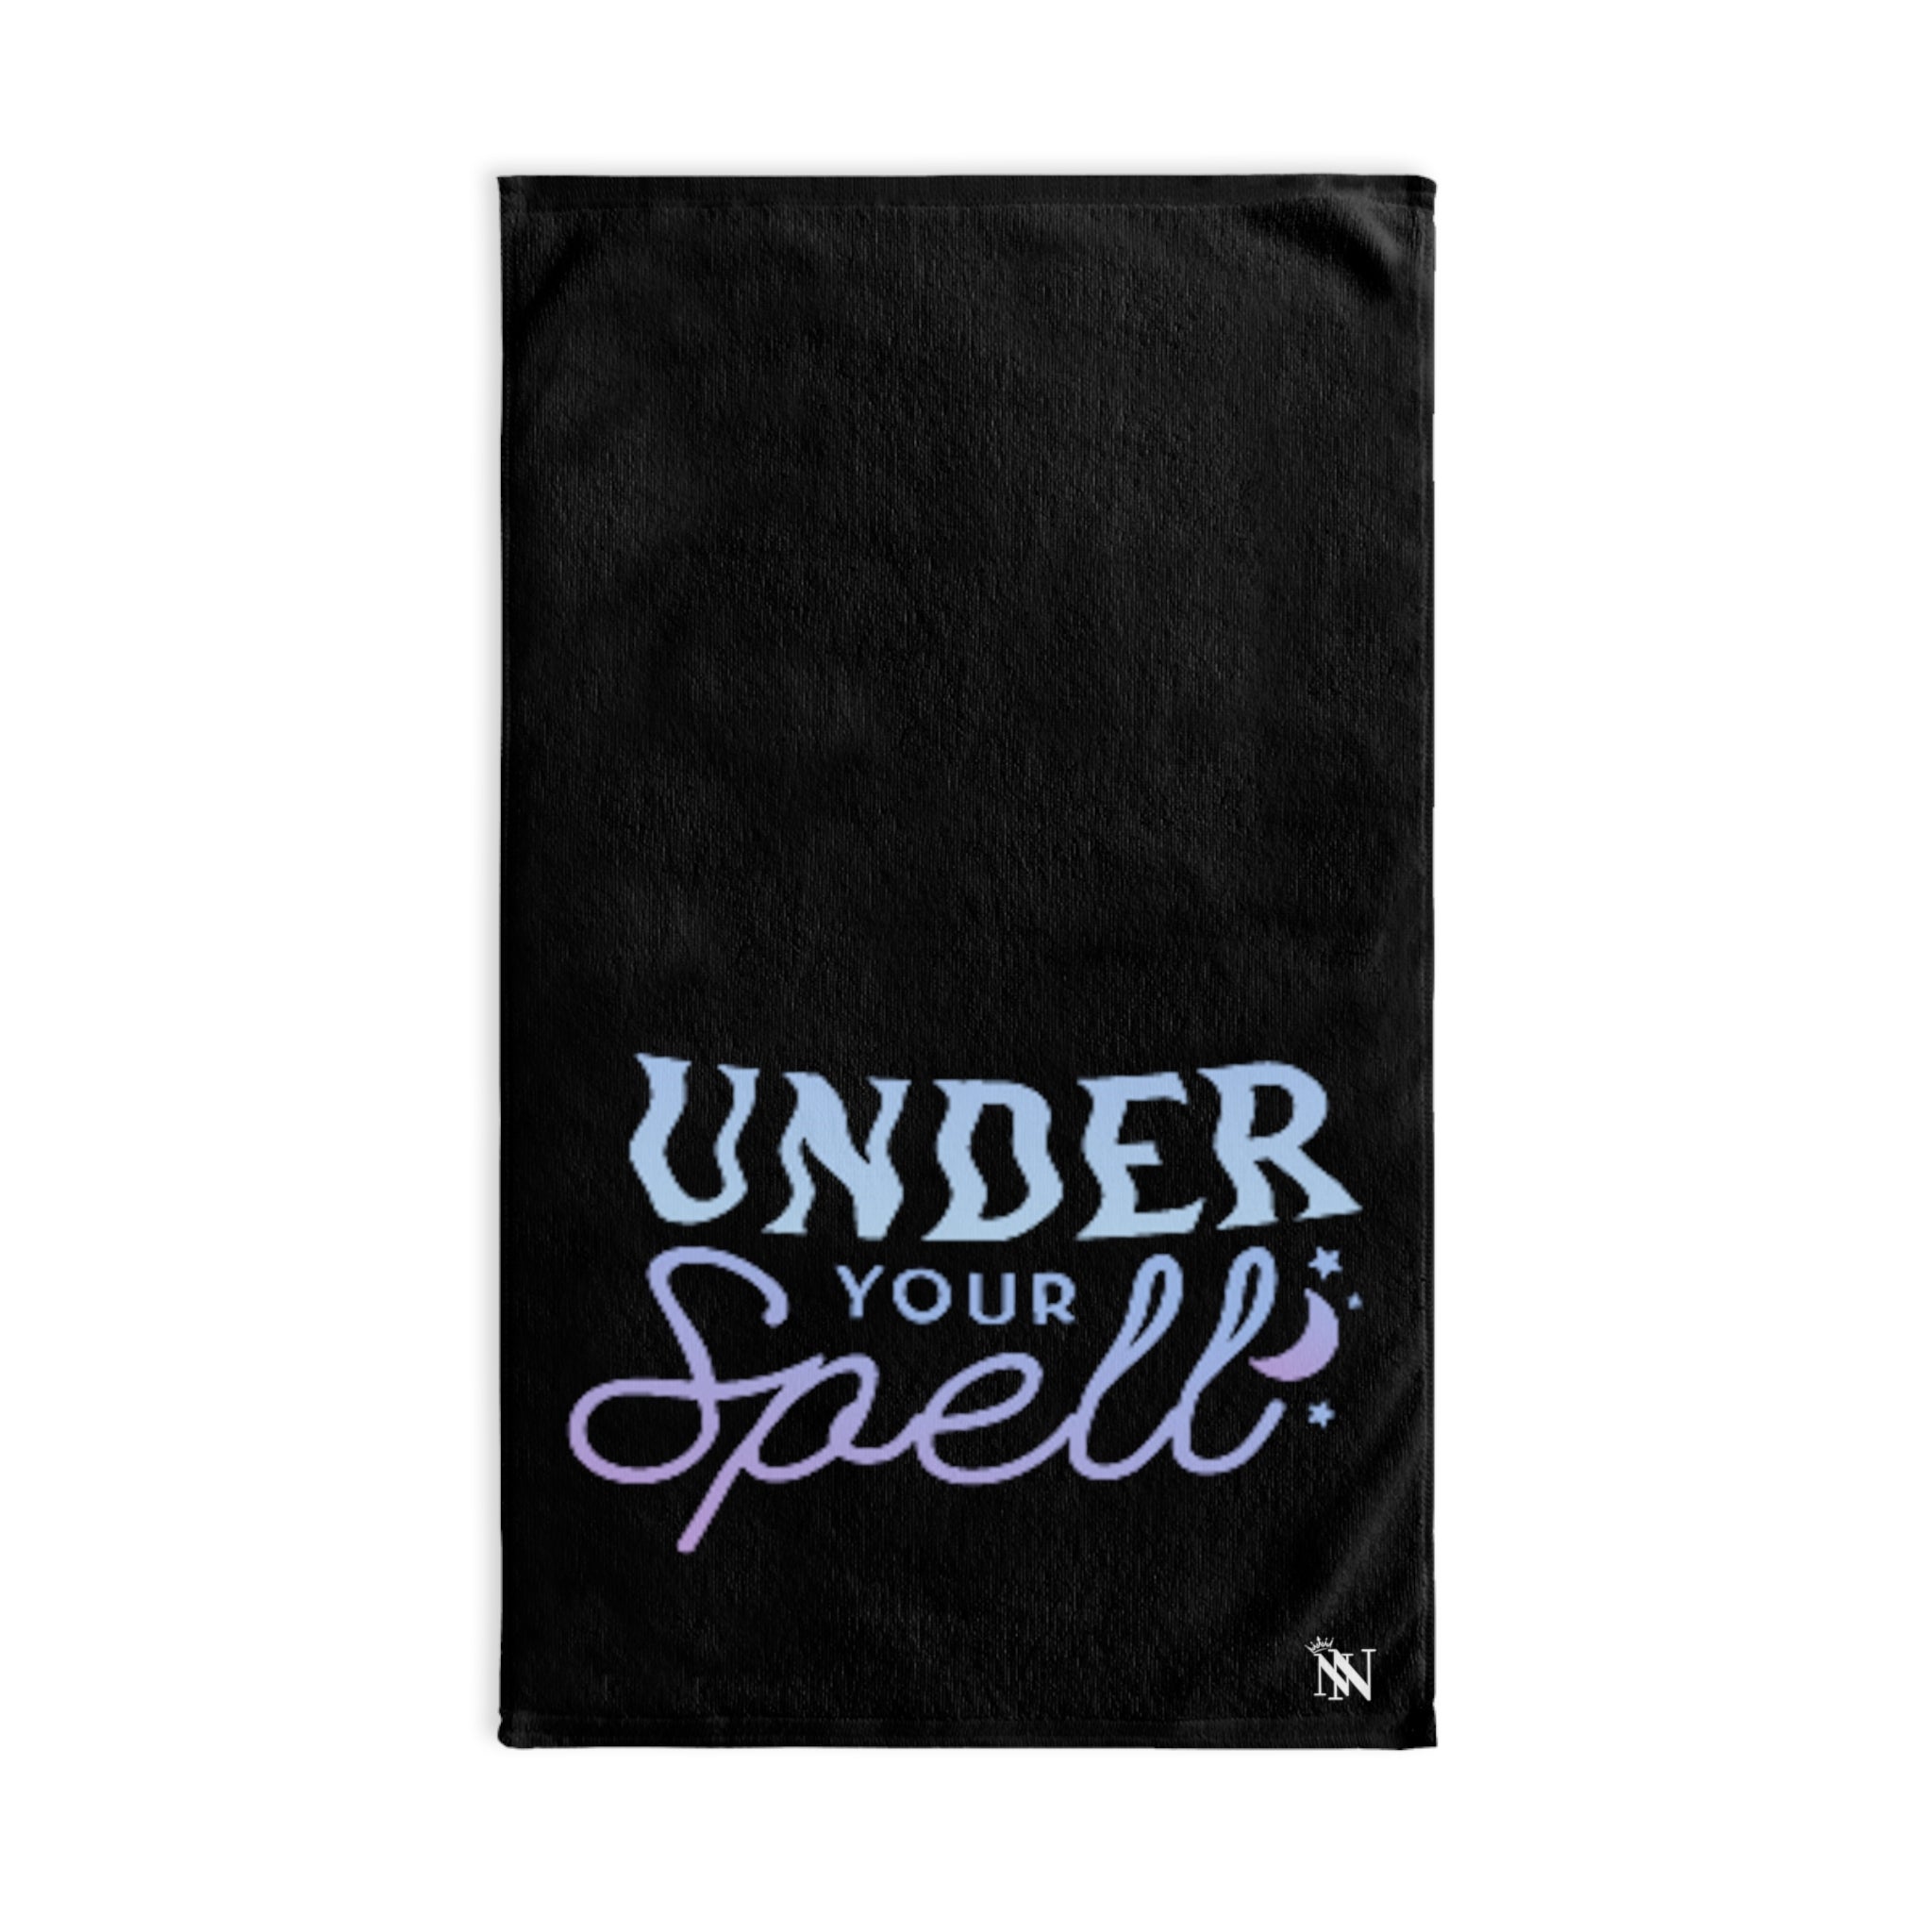 Spell Under Cast Black | Sexy Gifts for Boyfriend, Funny Towel Romantic Gift for Wedding Couple Fiance First Year 2nd Anniversary Valentines, Party Gag Gifts, Joke Humor Cloth for Husband Men BF NECTAR NAPKINS